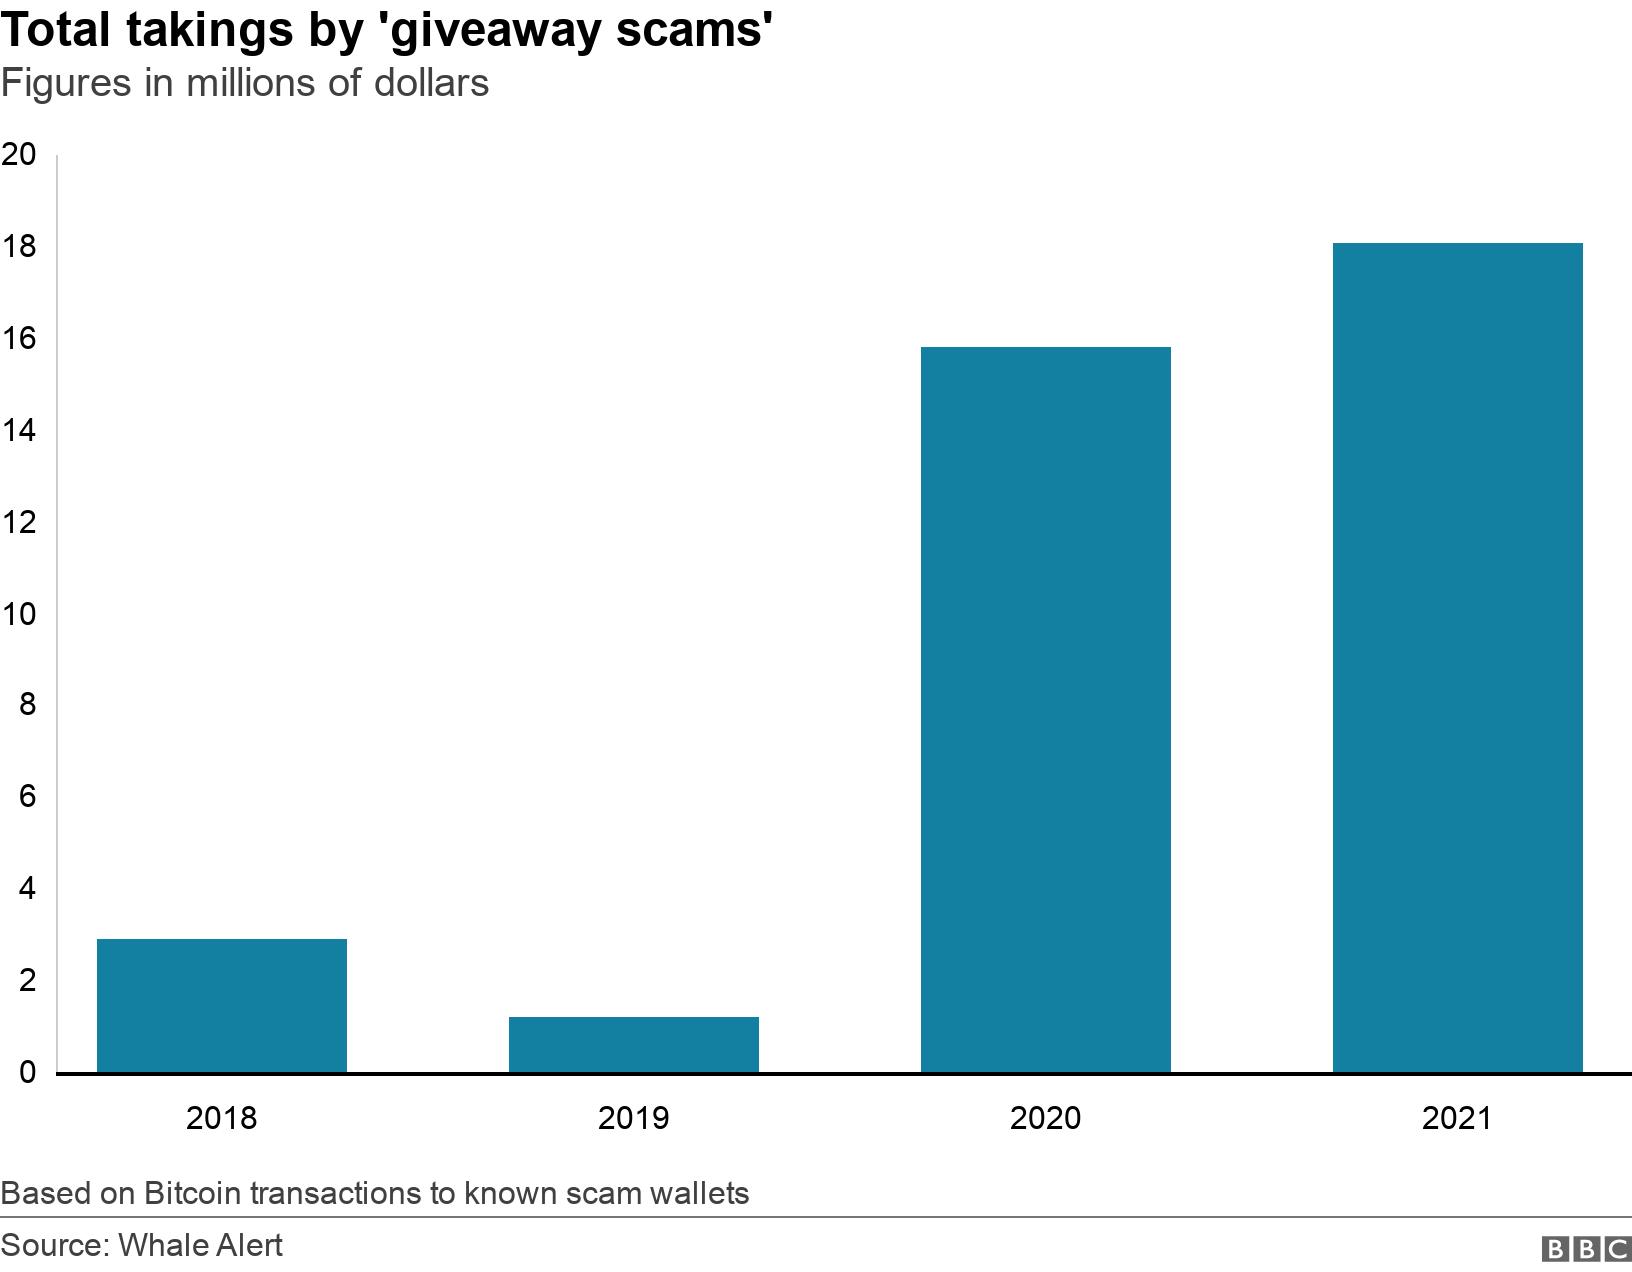 Total takings by 'giveaway scams'. Figures in millions of dollars.  Based on Bitcoin transactions to known scam wallets.